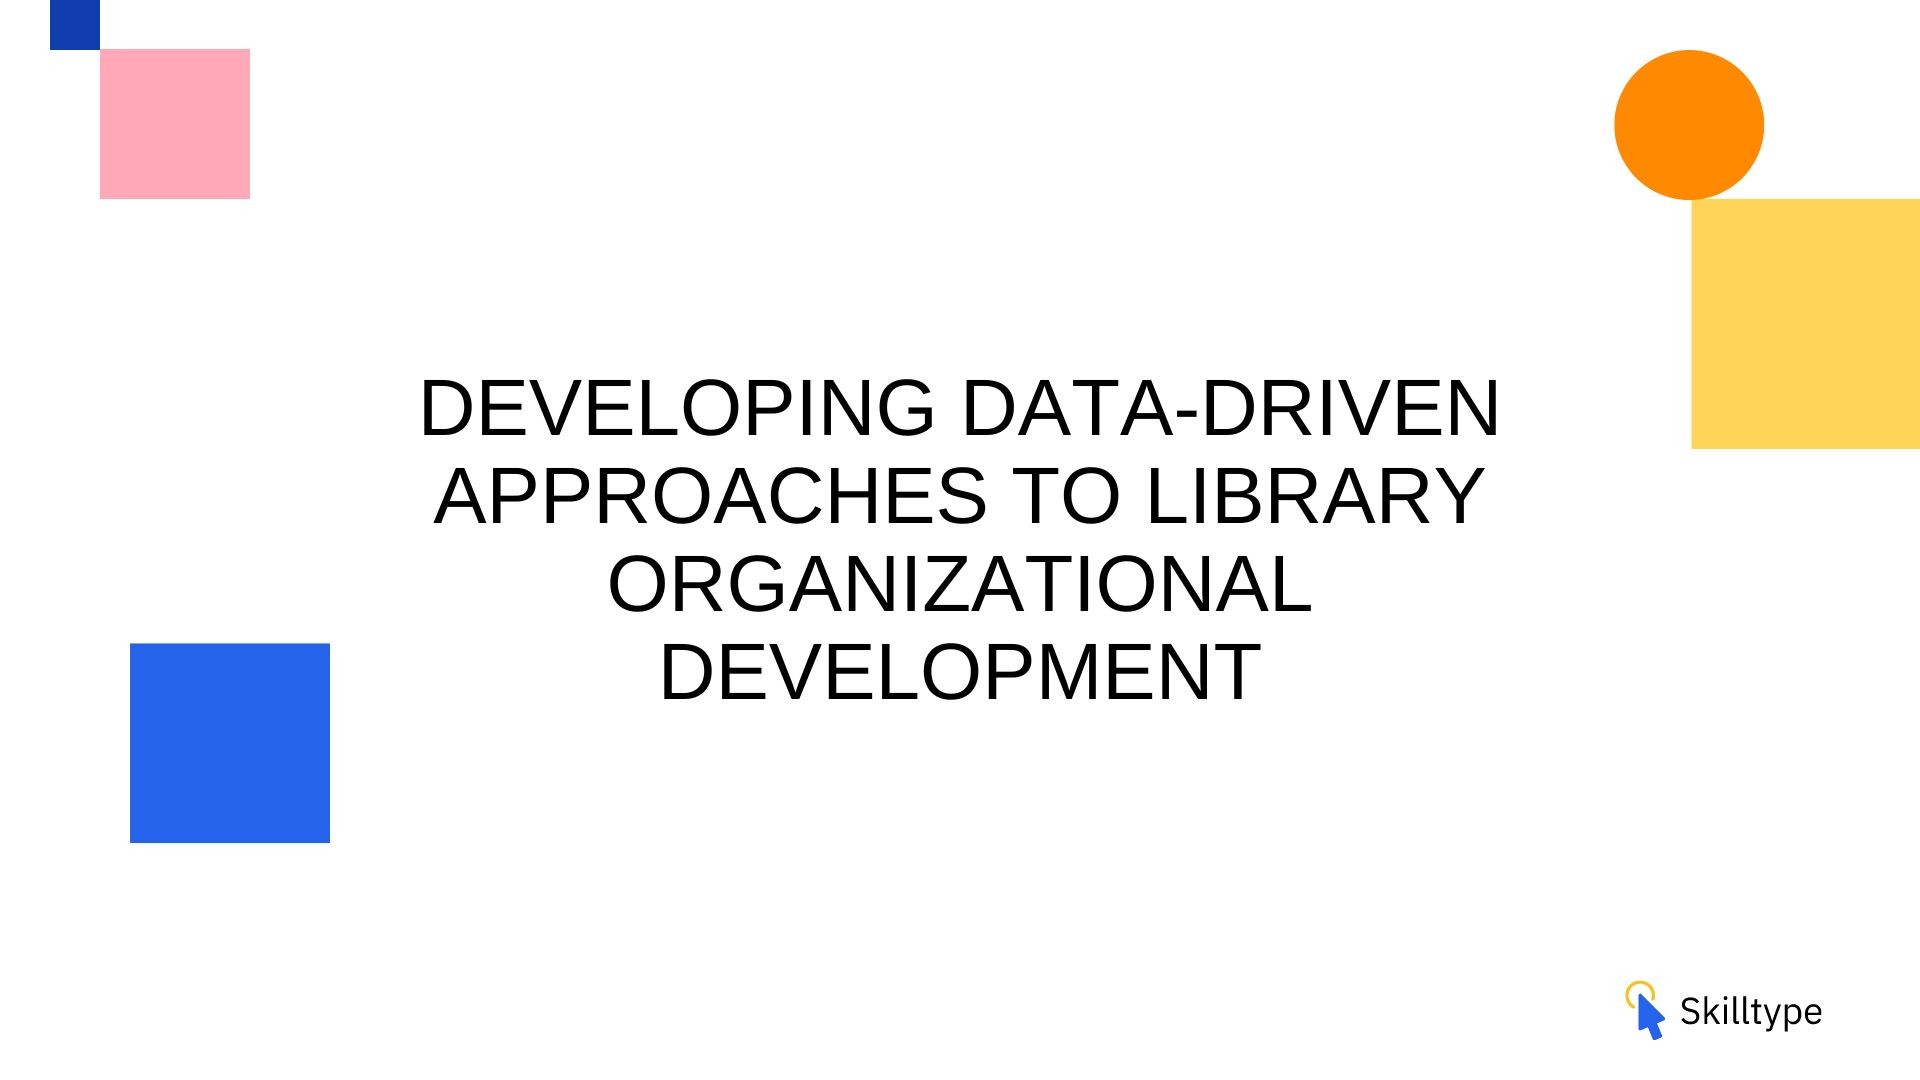 Developing data-driven approaches to library organizational development